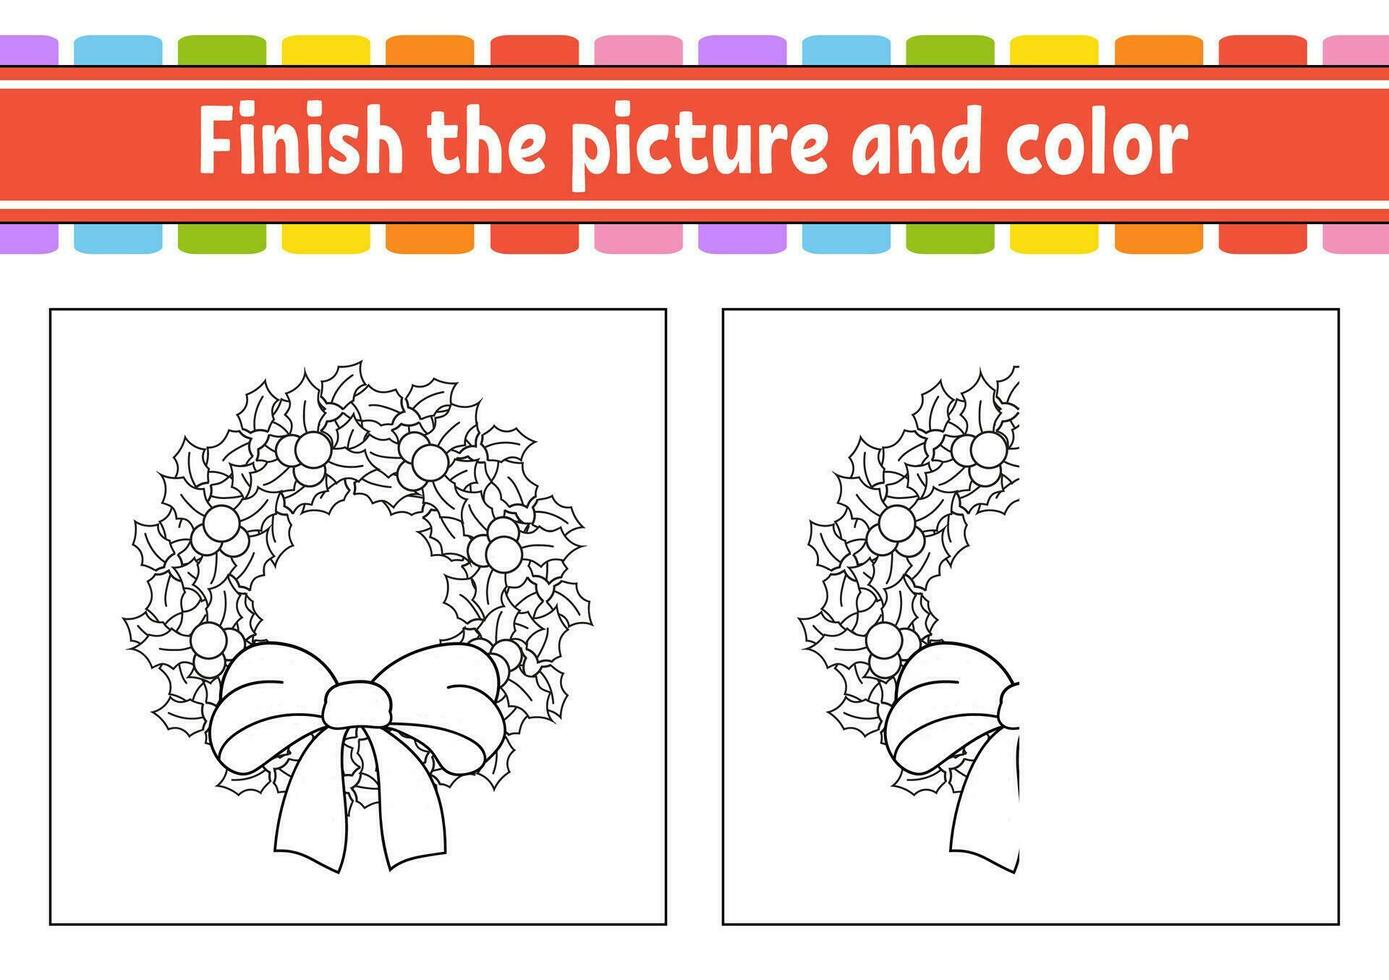 Finish the picture and color. cartoon character isolated on white background. For kids education. Activity worksheet. Vector illustration.